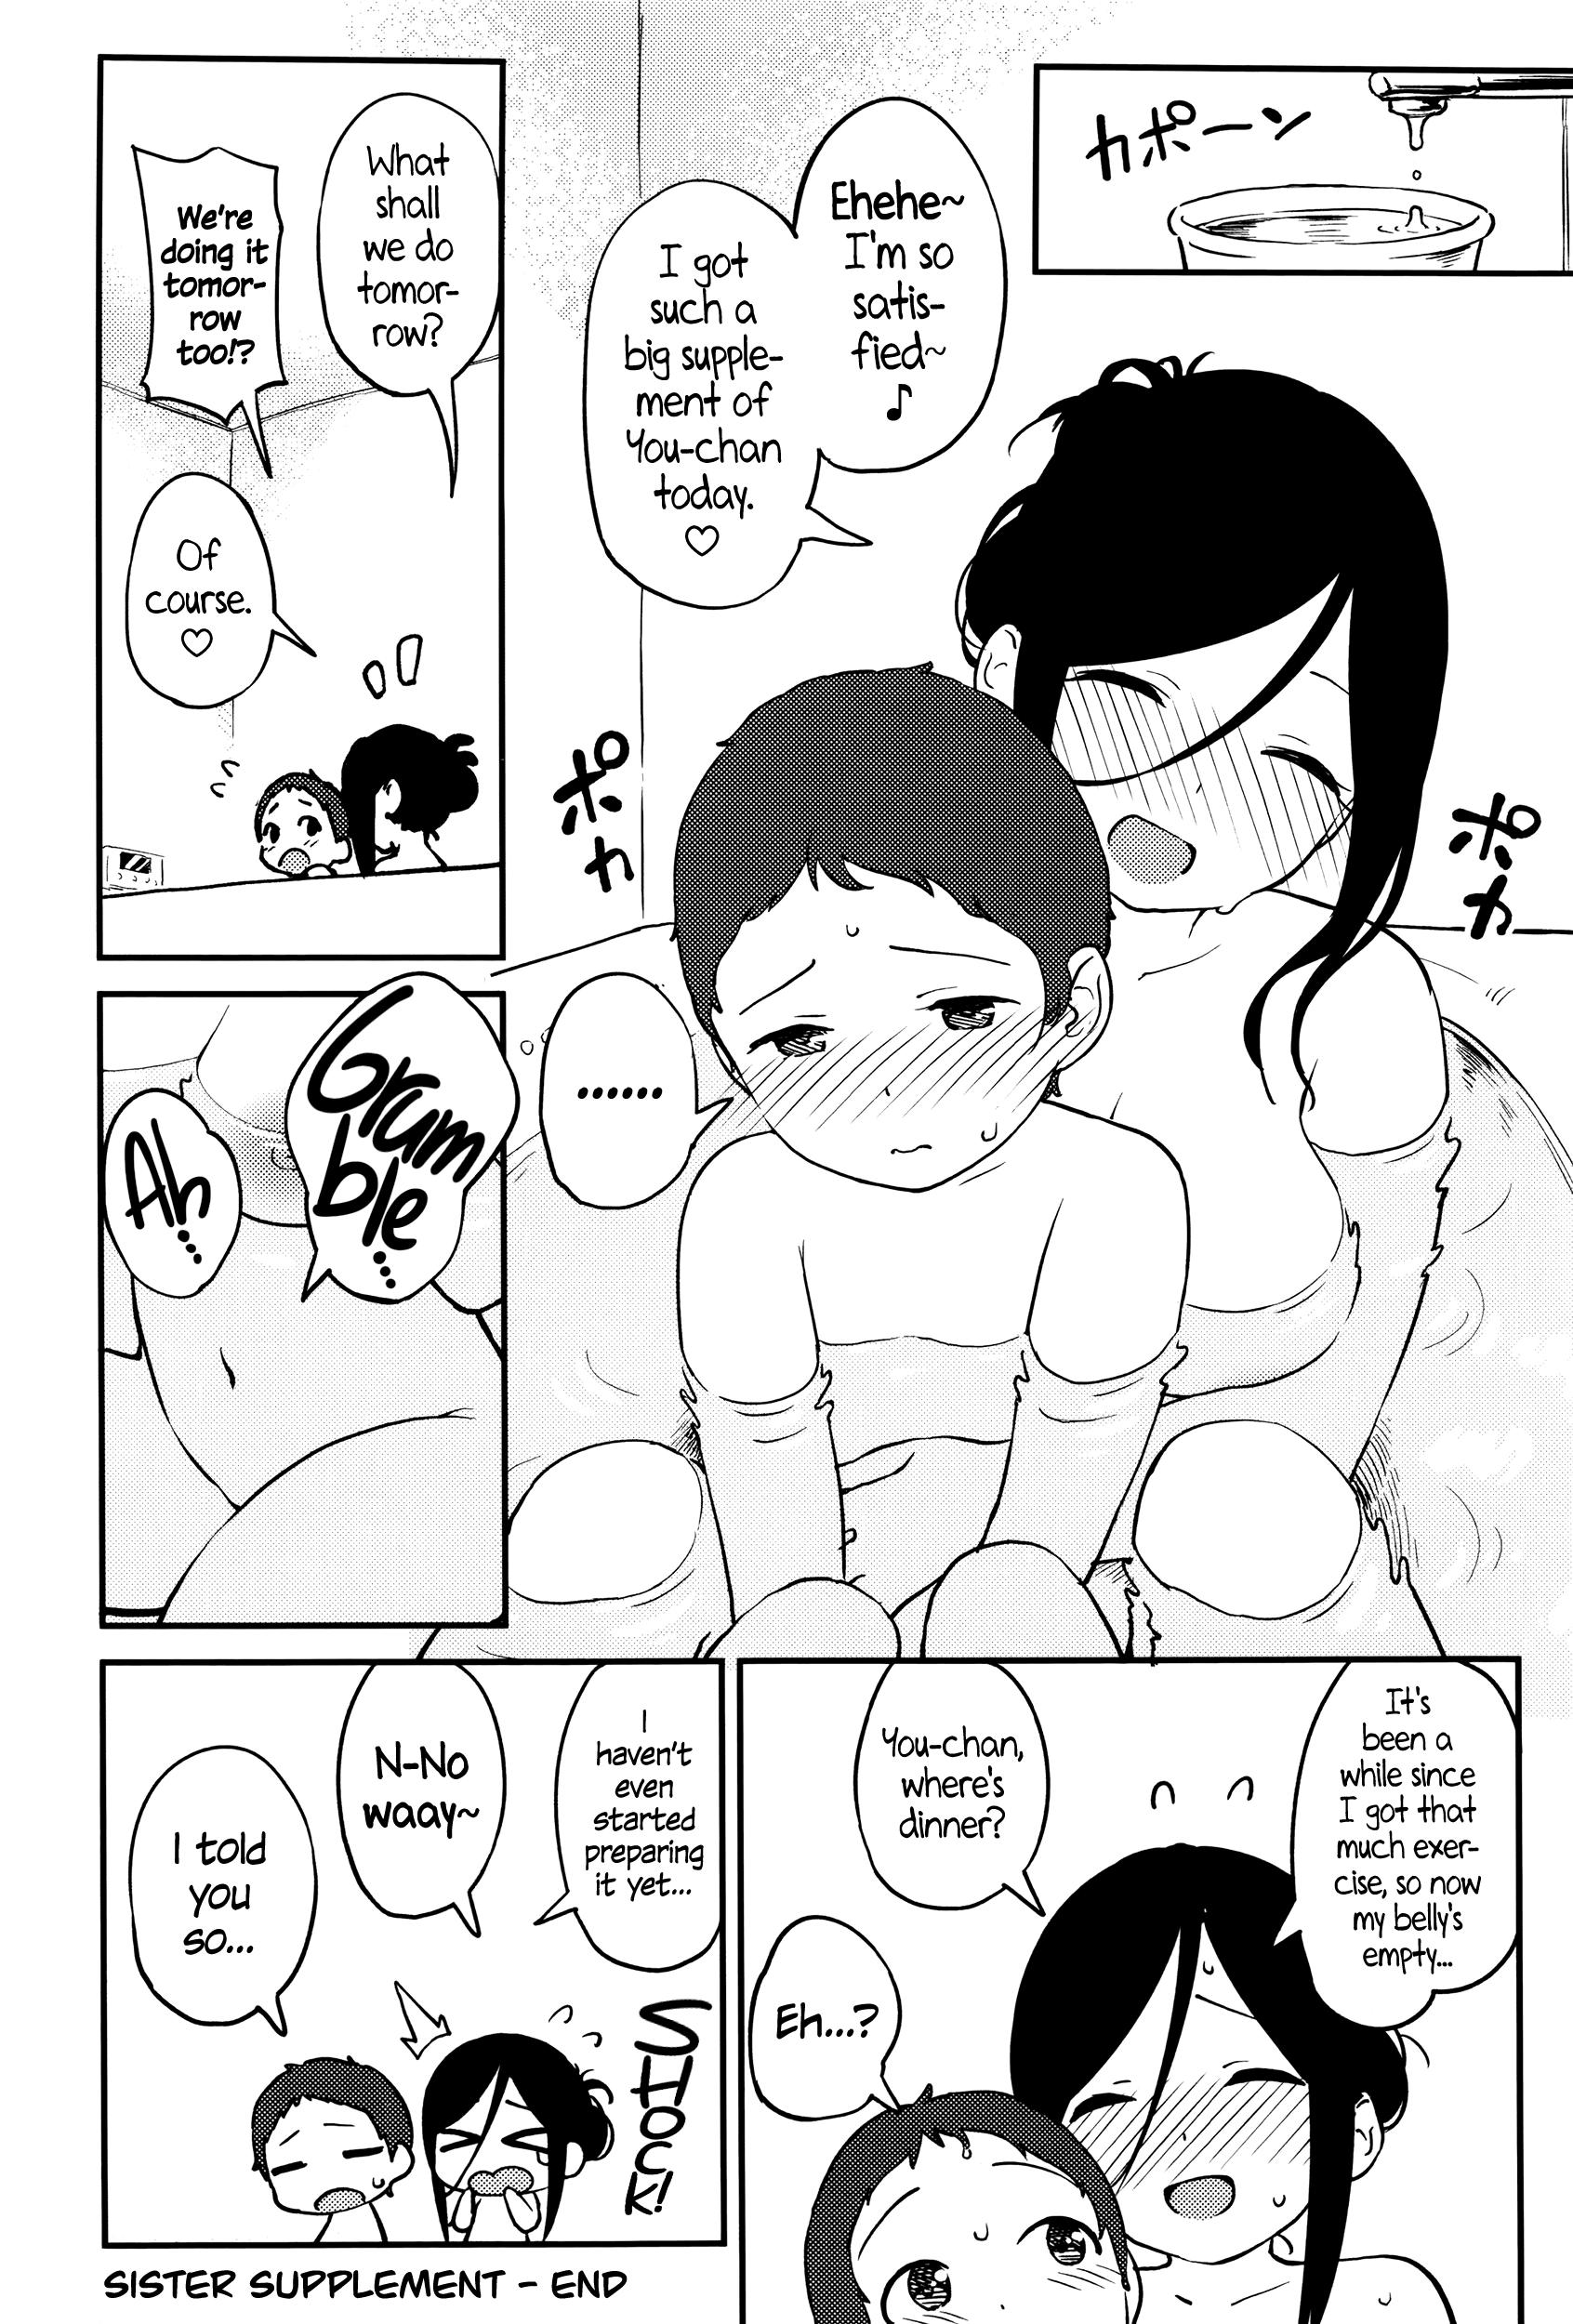 Perfect Butt Sister's Supplement Gay Kissing - Page 22